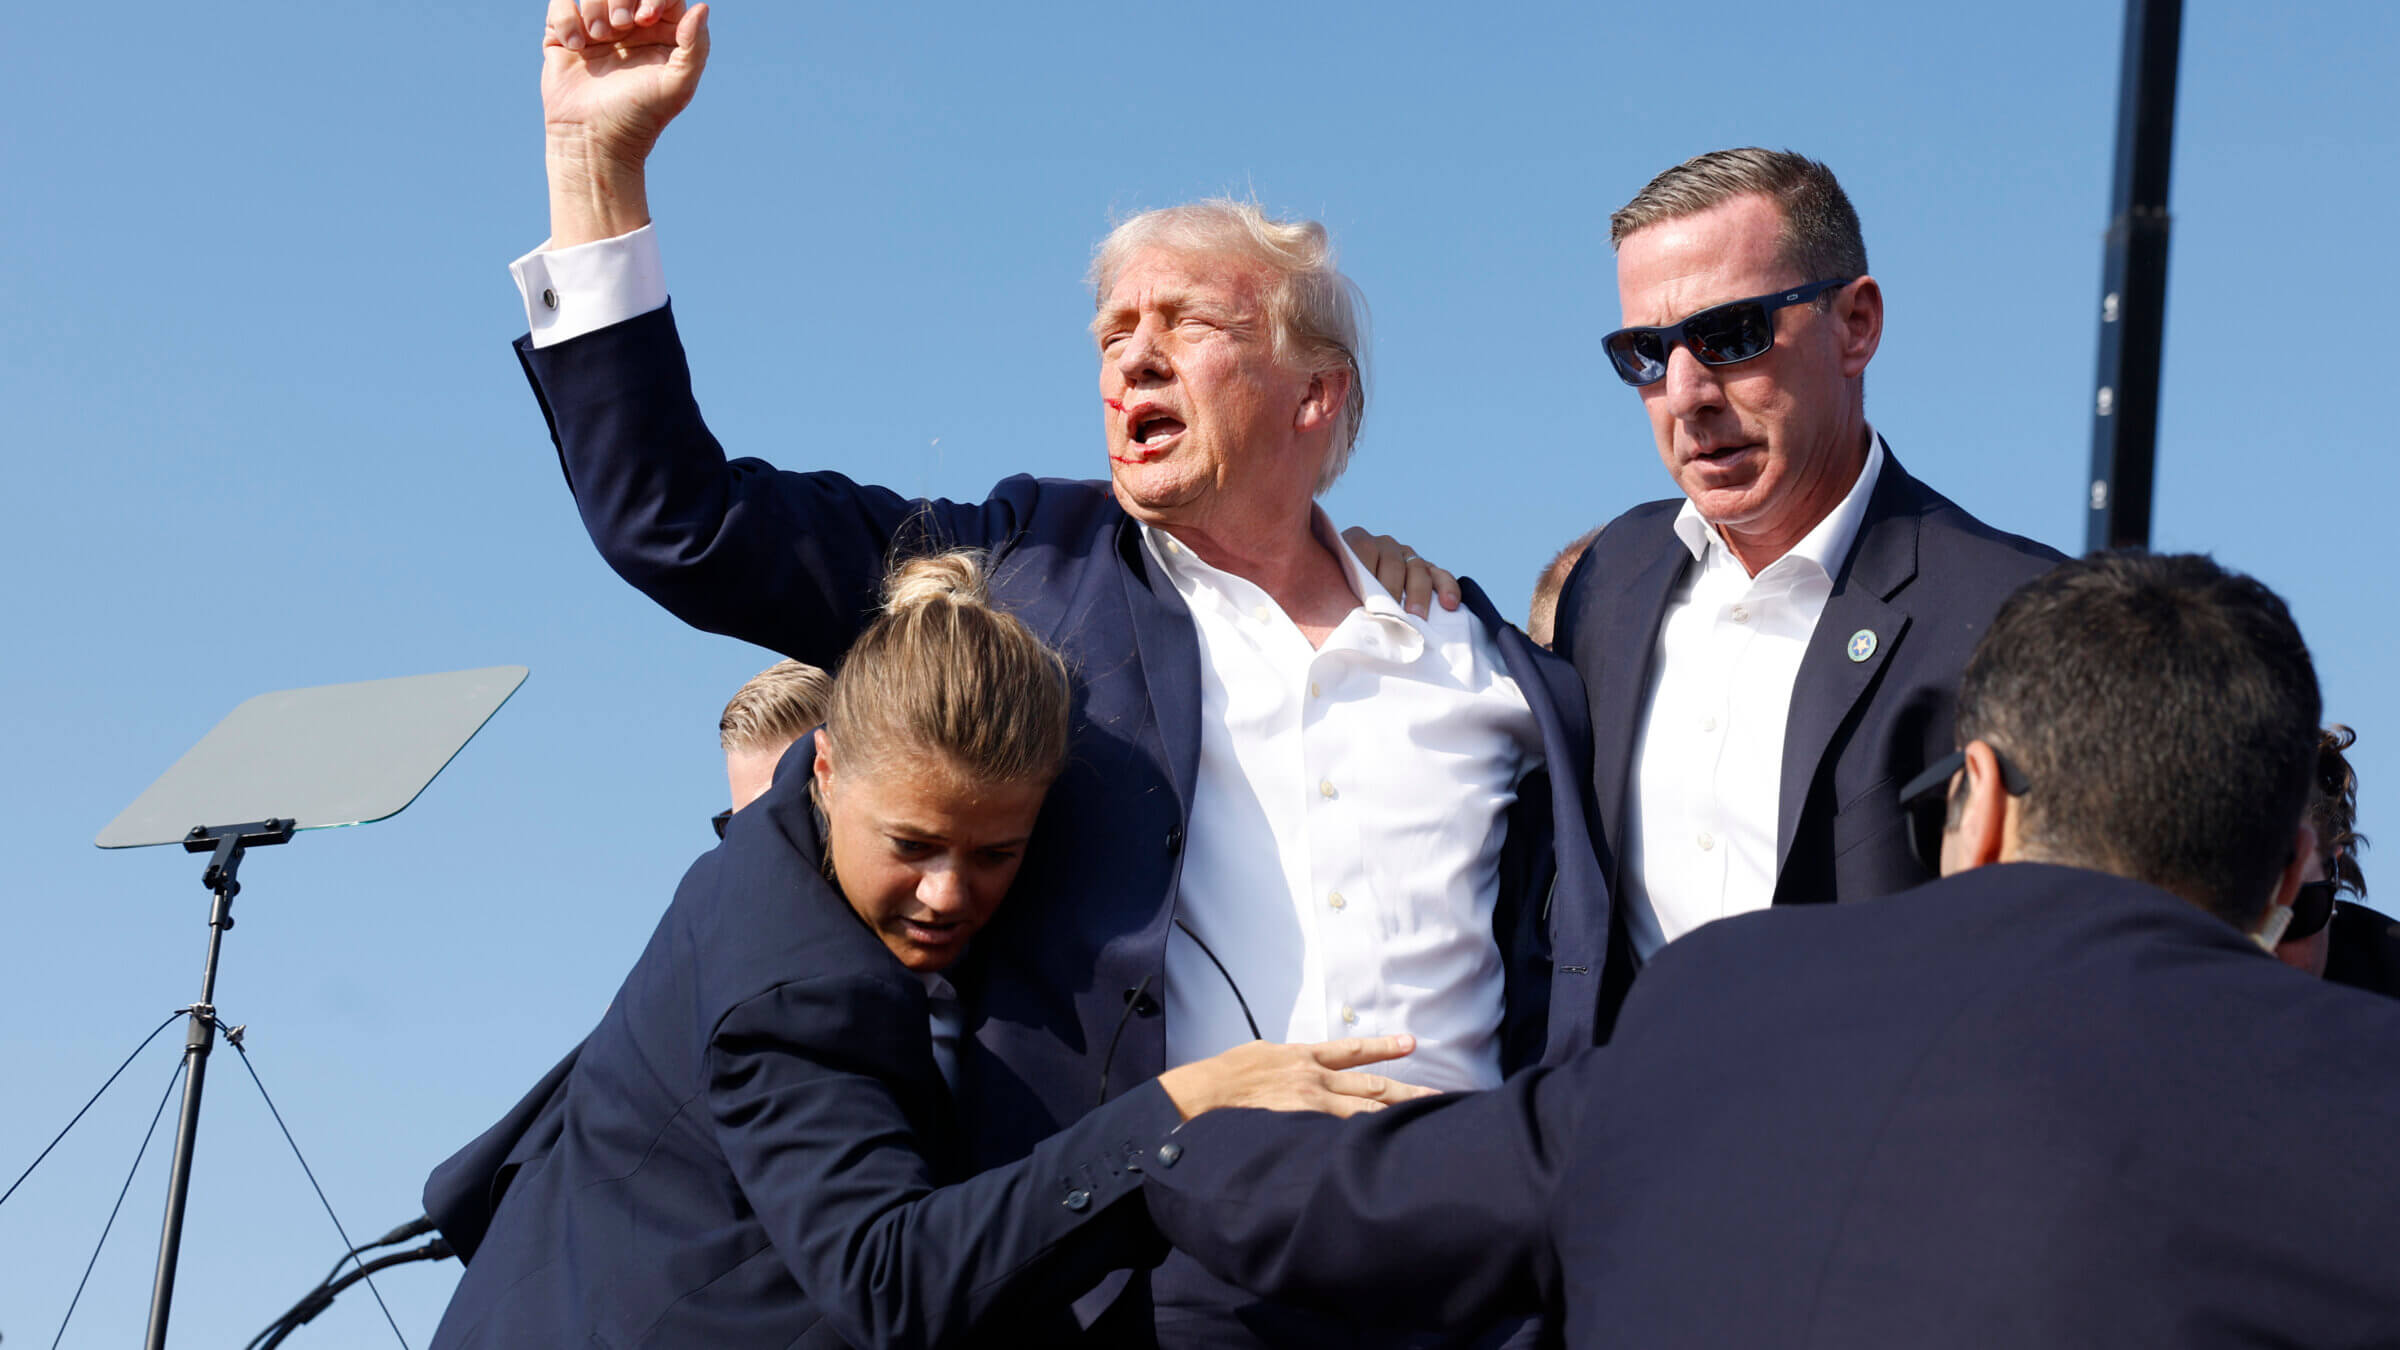 Republican presidential candidate and former President Donald Trump is rushed offstage by U.S. Secret Service agents after being grazed by a bullet during a rally July 13 in Butler, Pennsylvania.